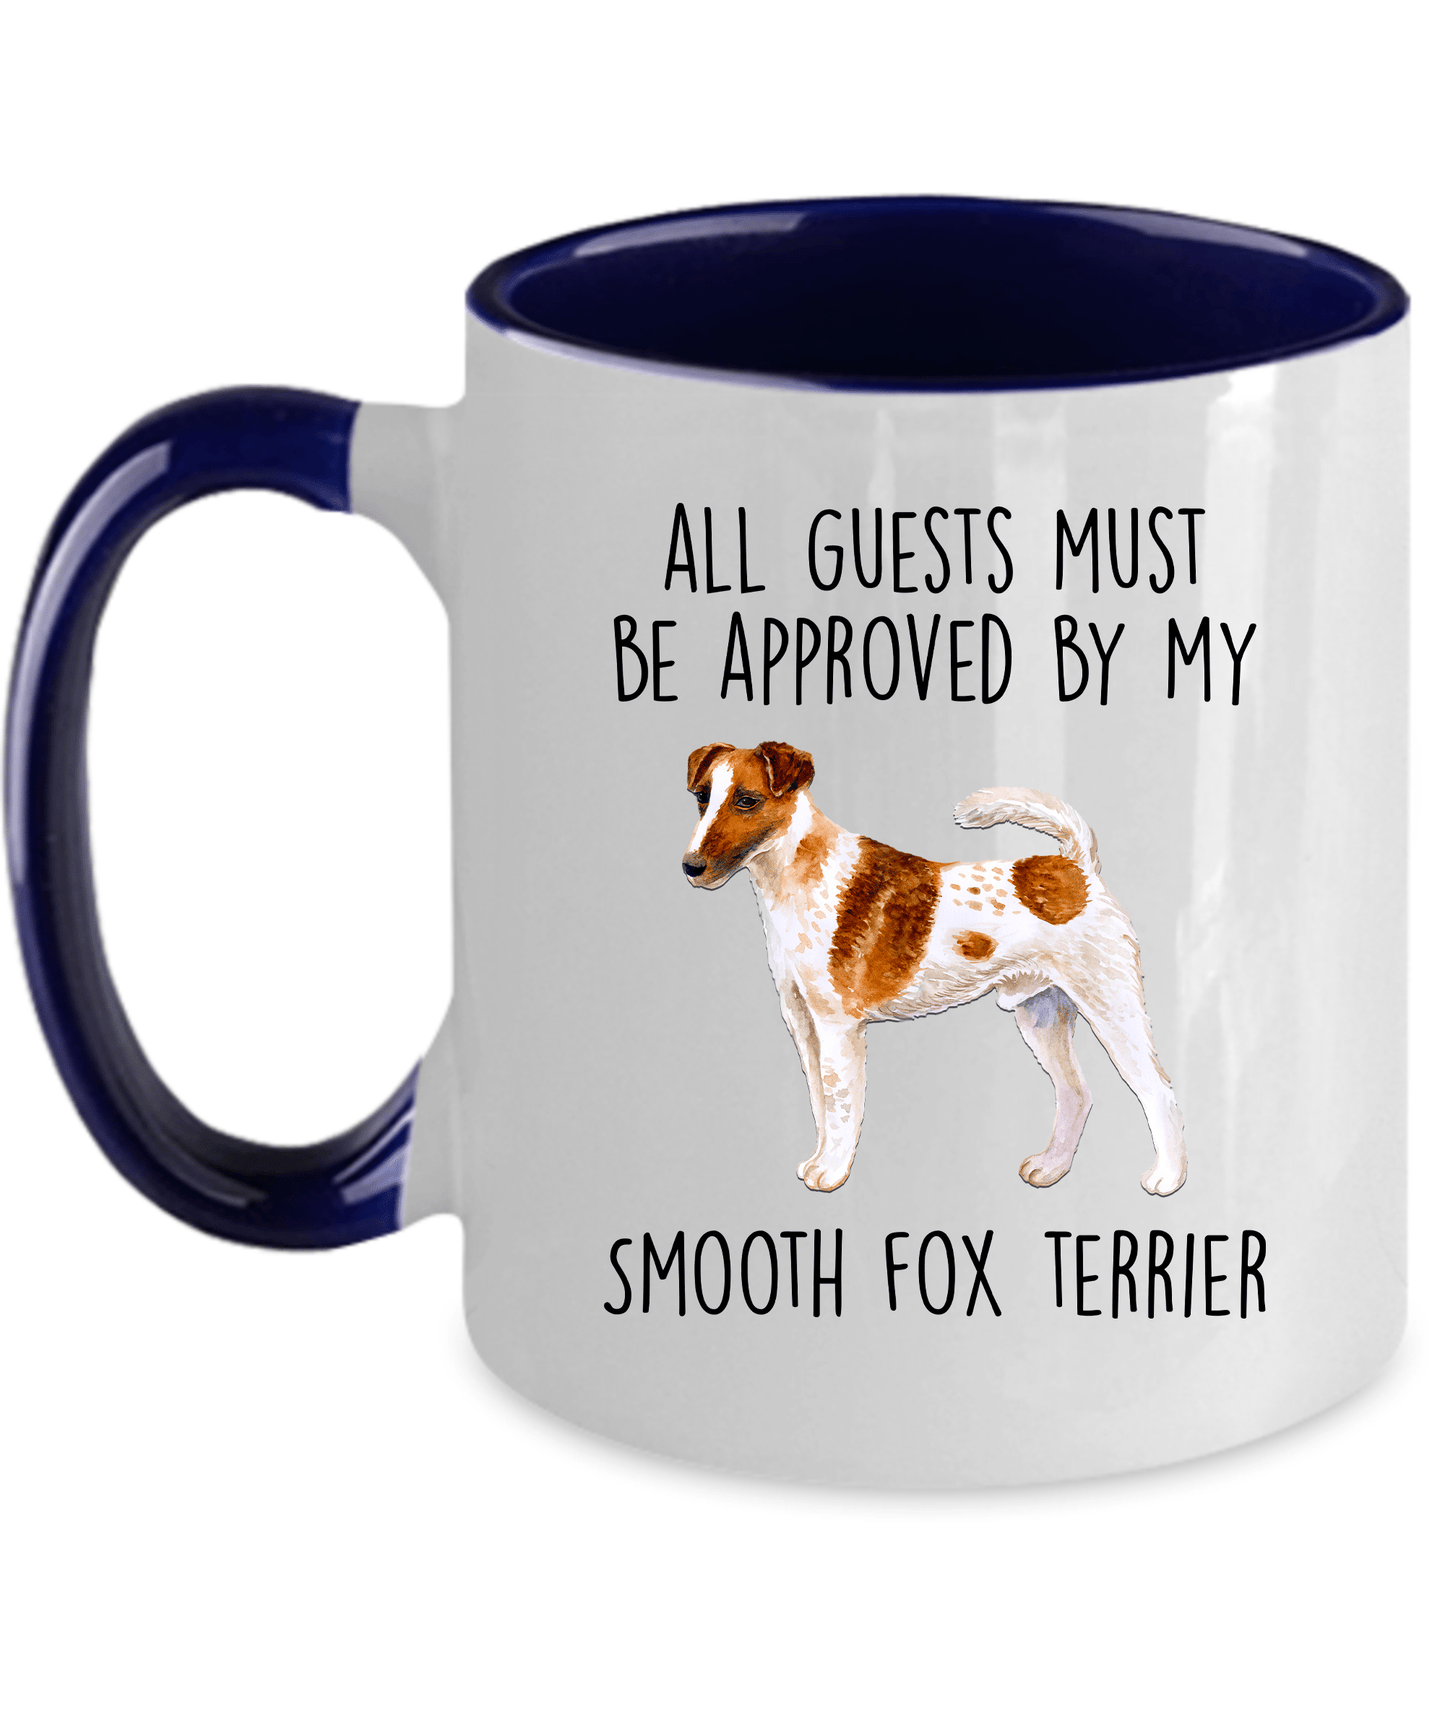 Funny Smooth Fox Terrier Dog Ceramic Coffee Mug - All Guests must be approved